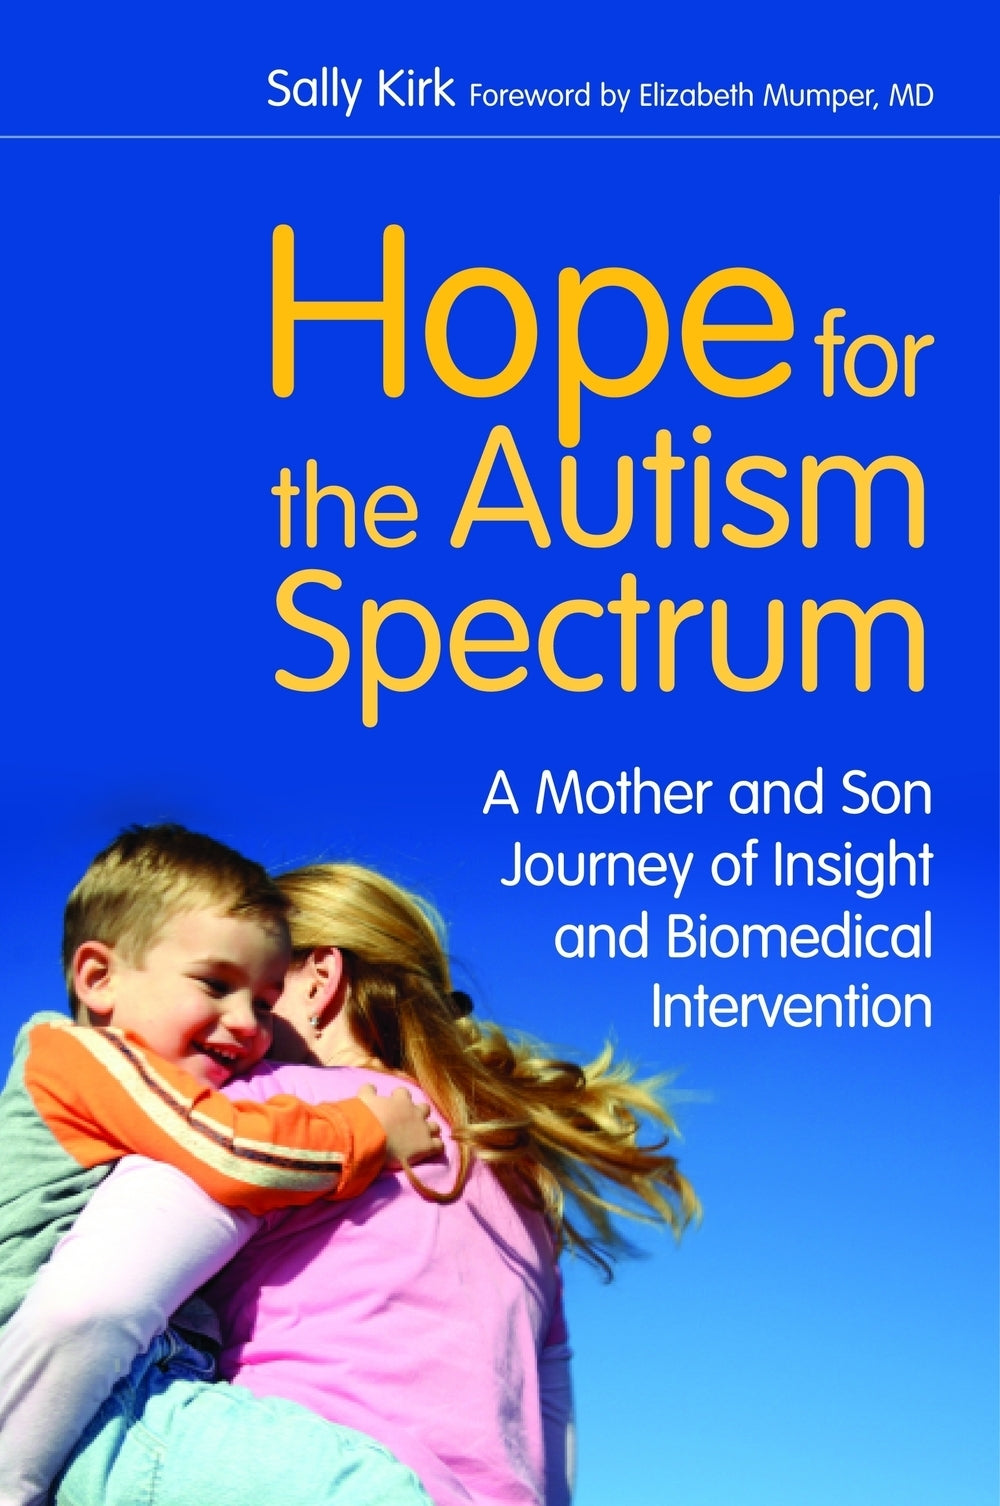 Hope for the Autism Spectrum by Sally Kirk